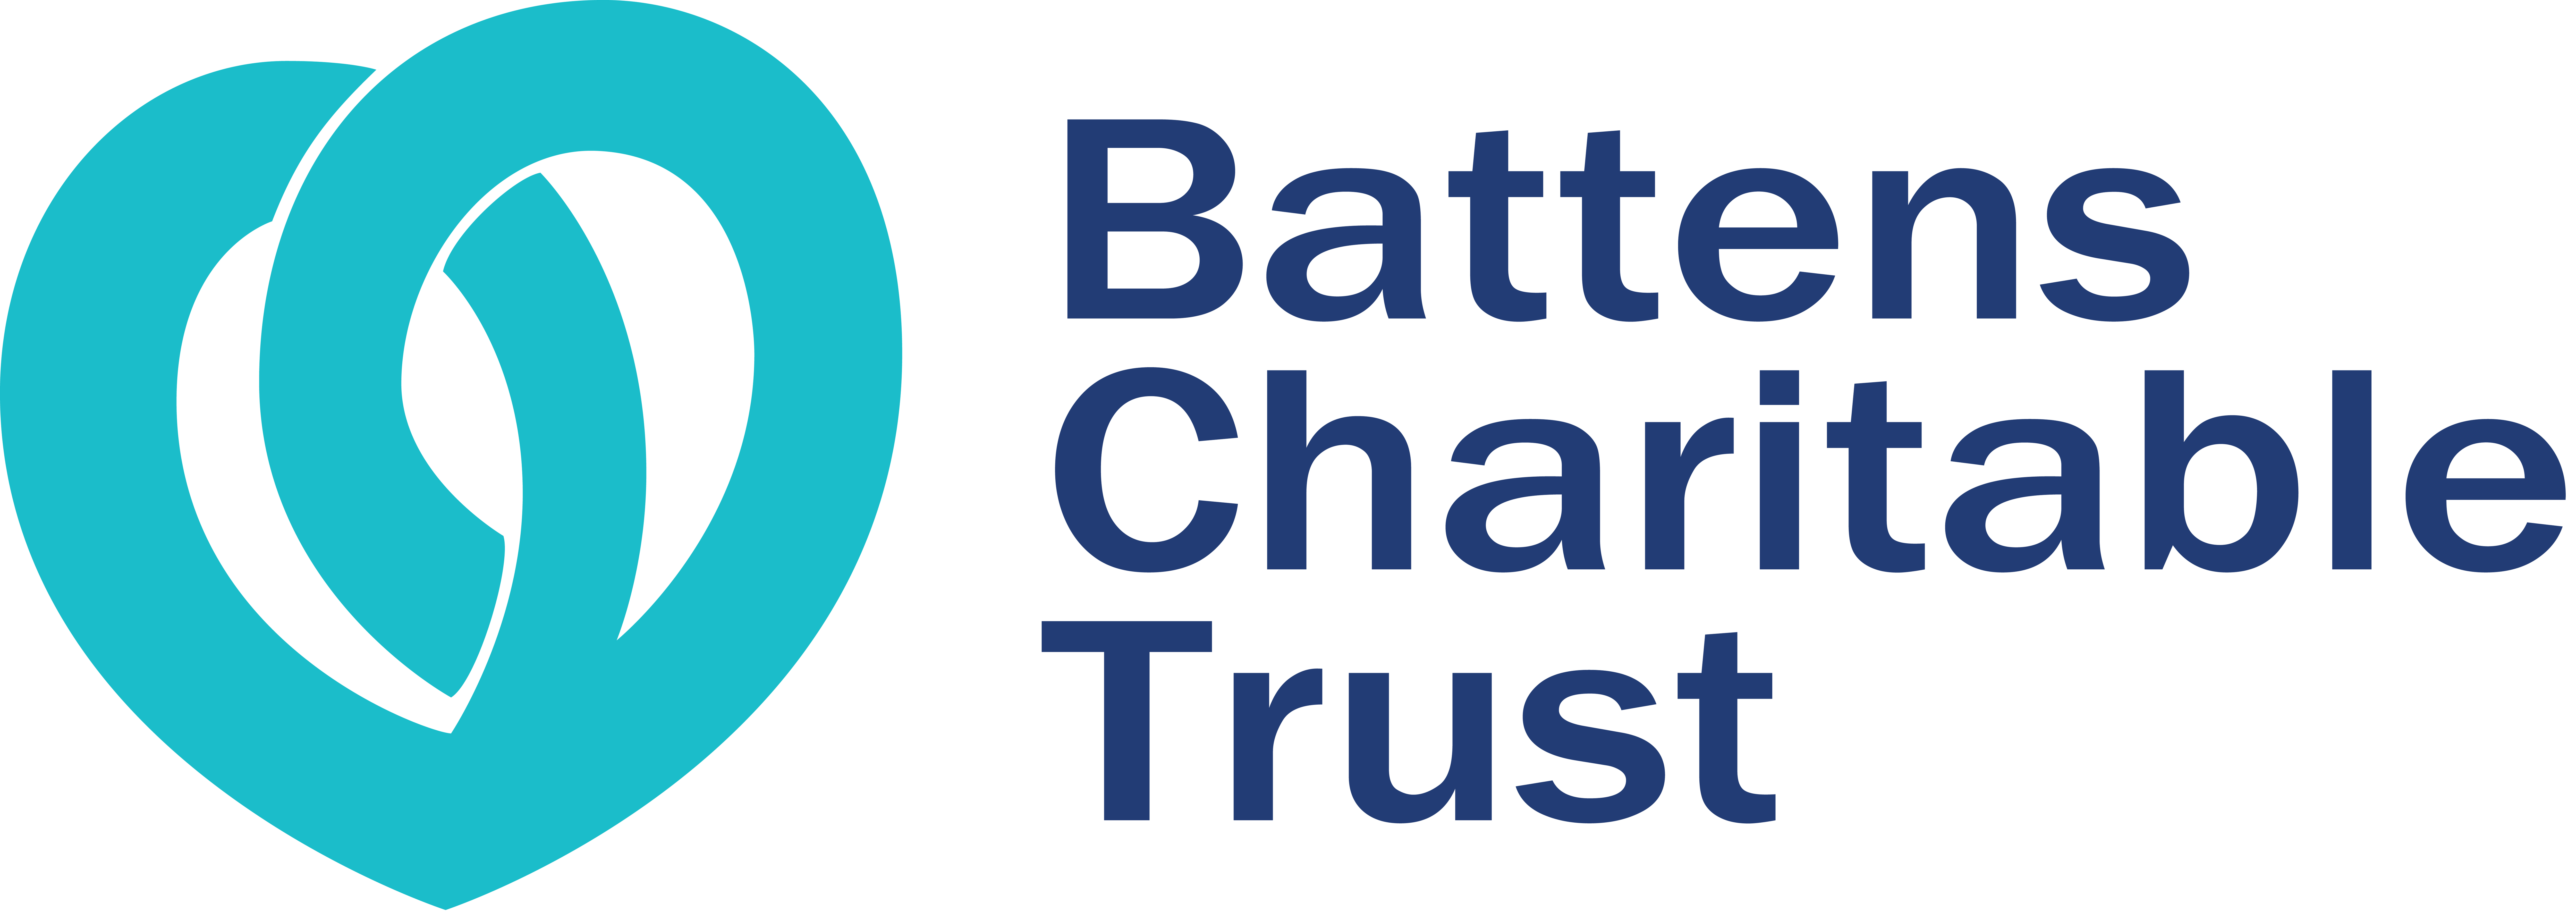 Battens Charitable Trust book cover image